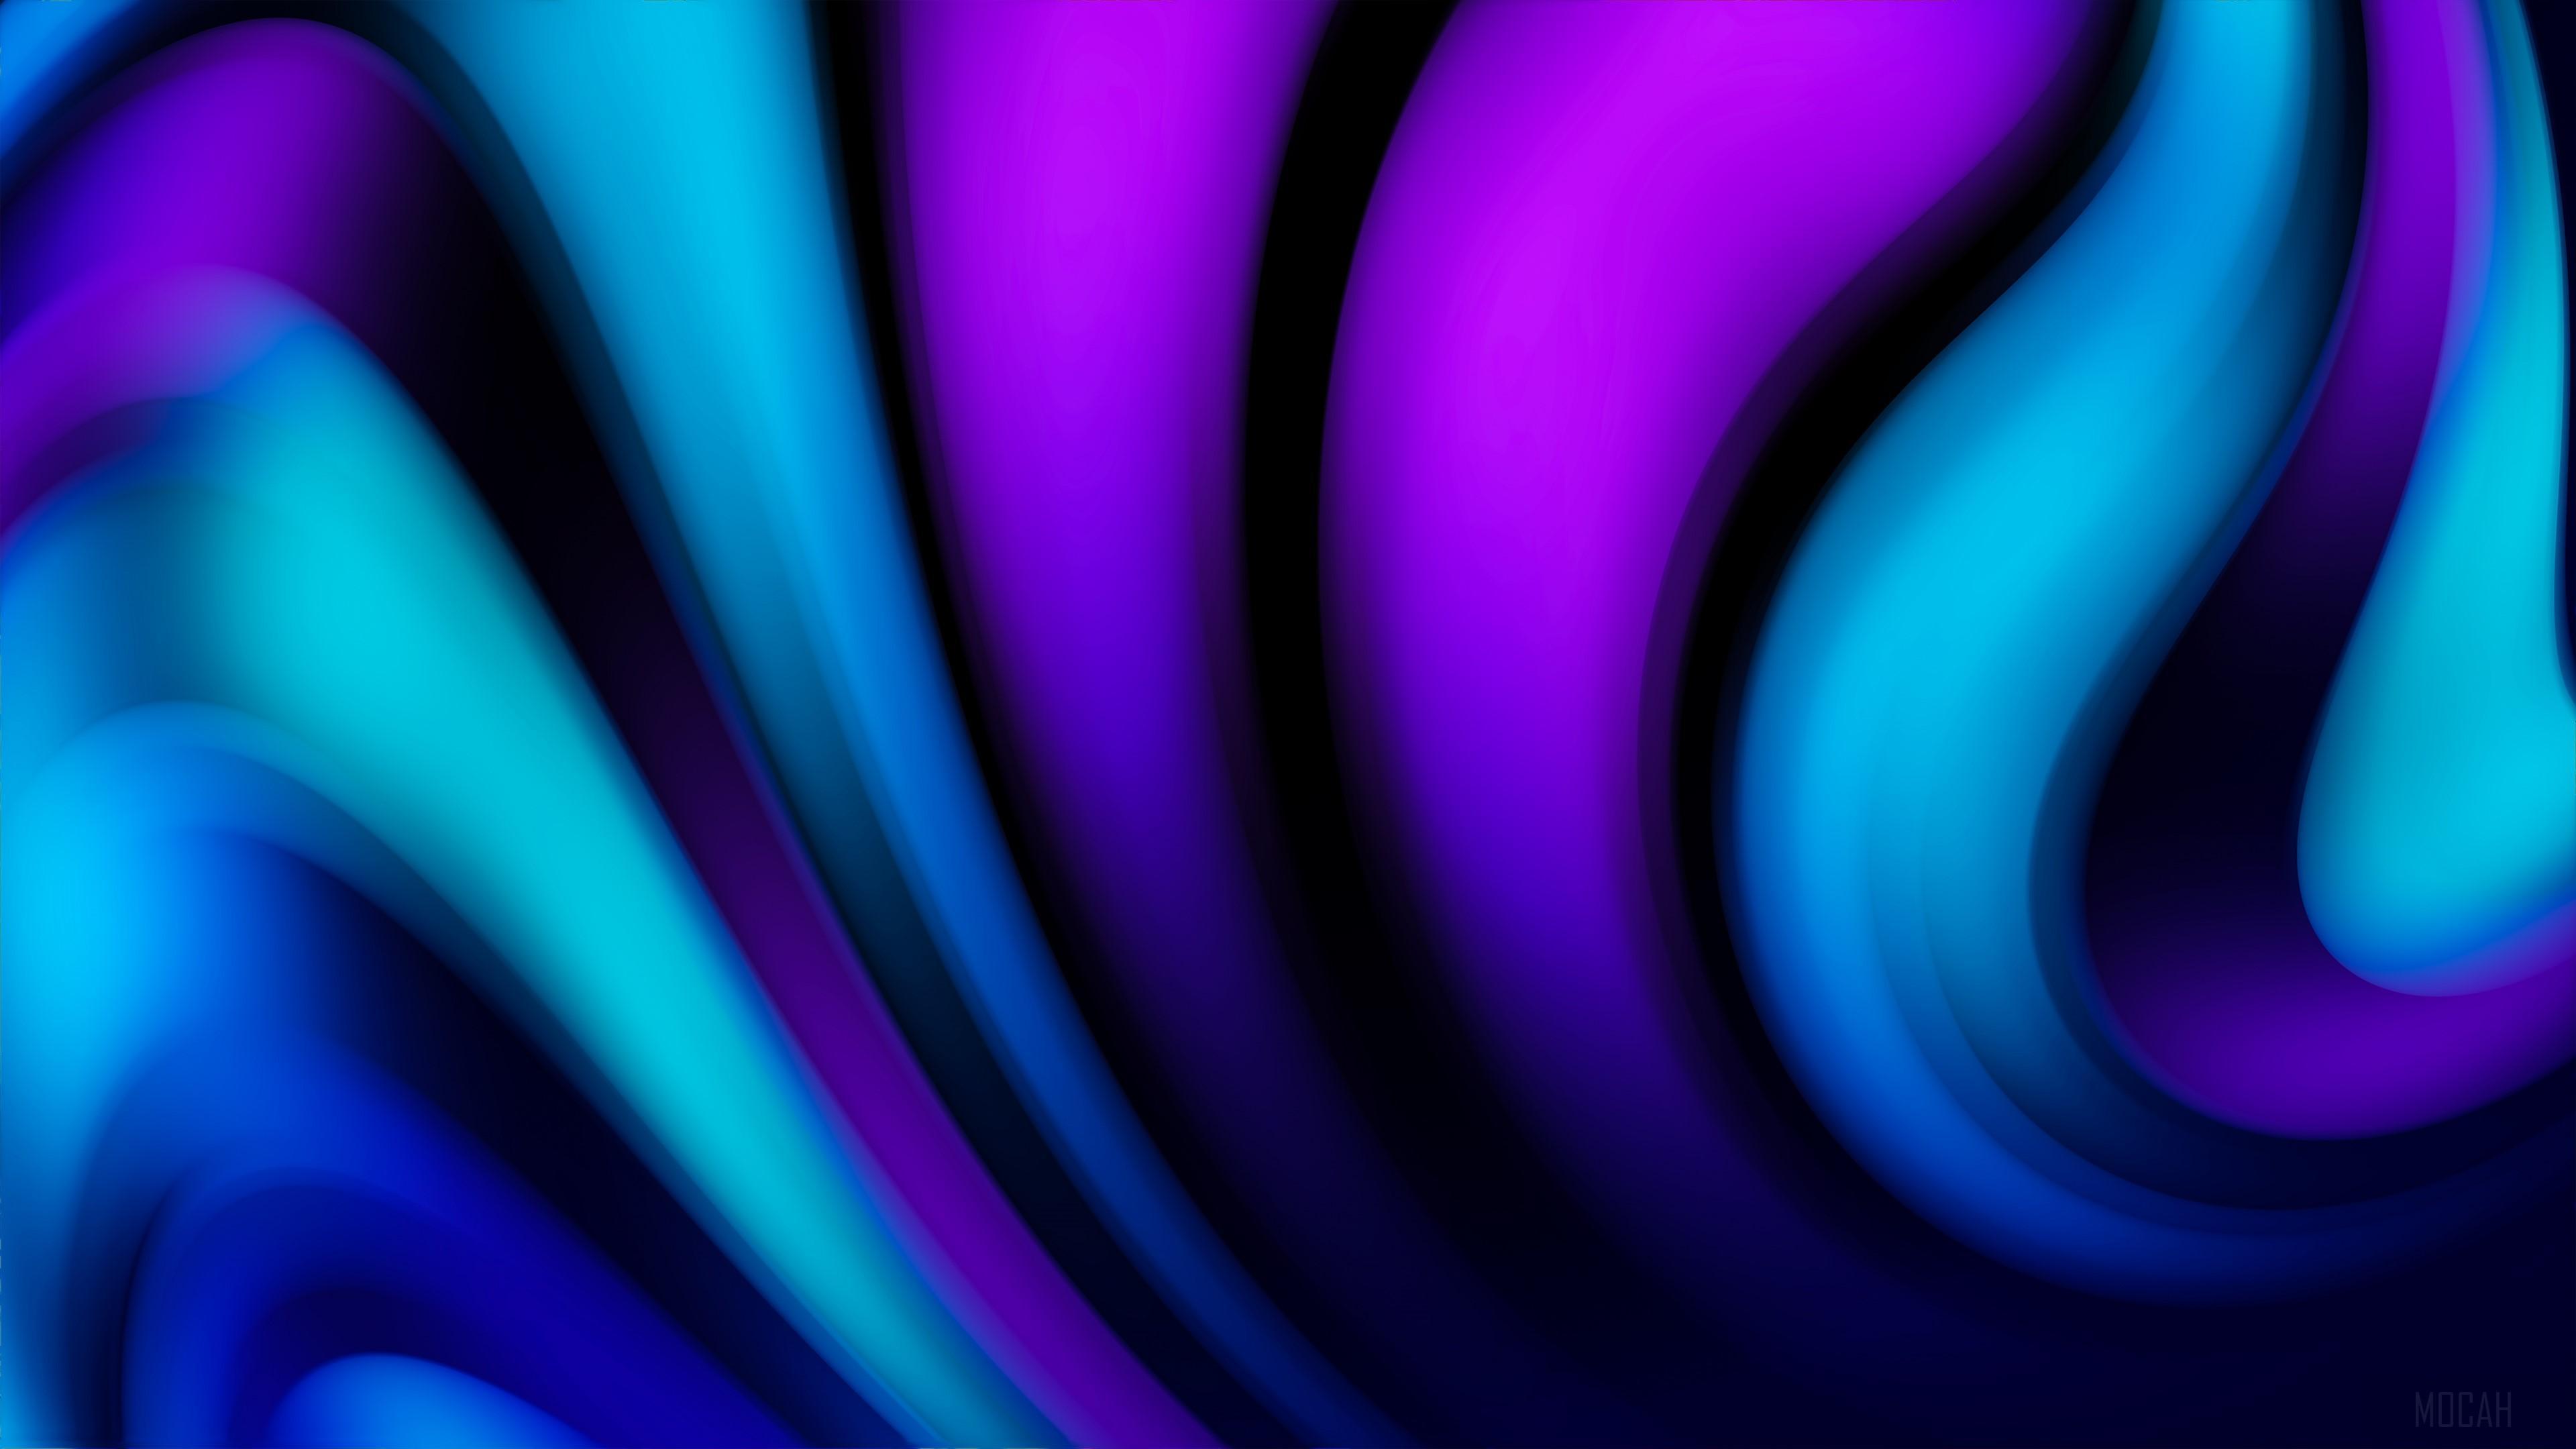 HD wallpaper, Purple Blue Moving Down Abstract 4K